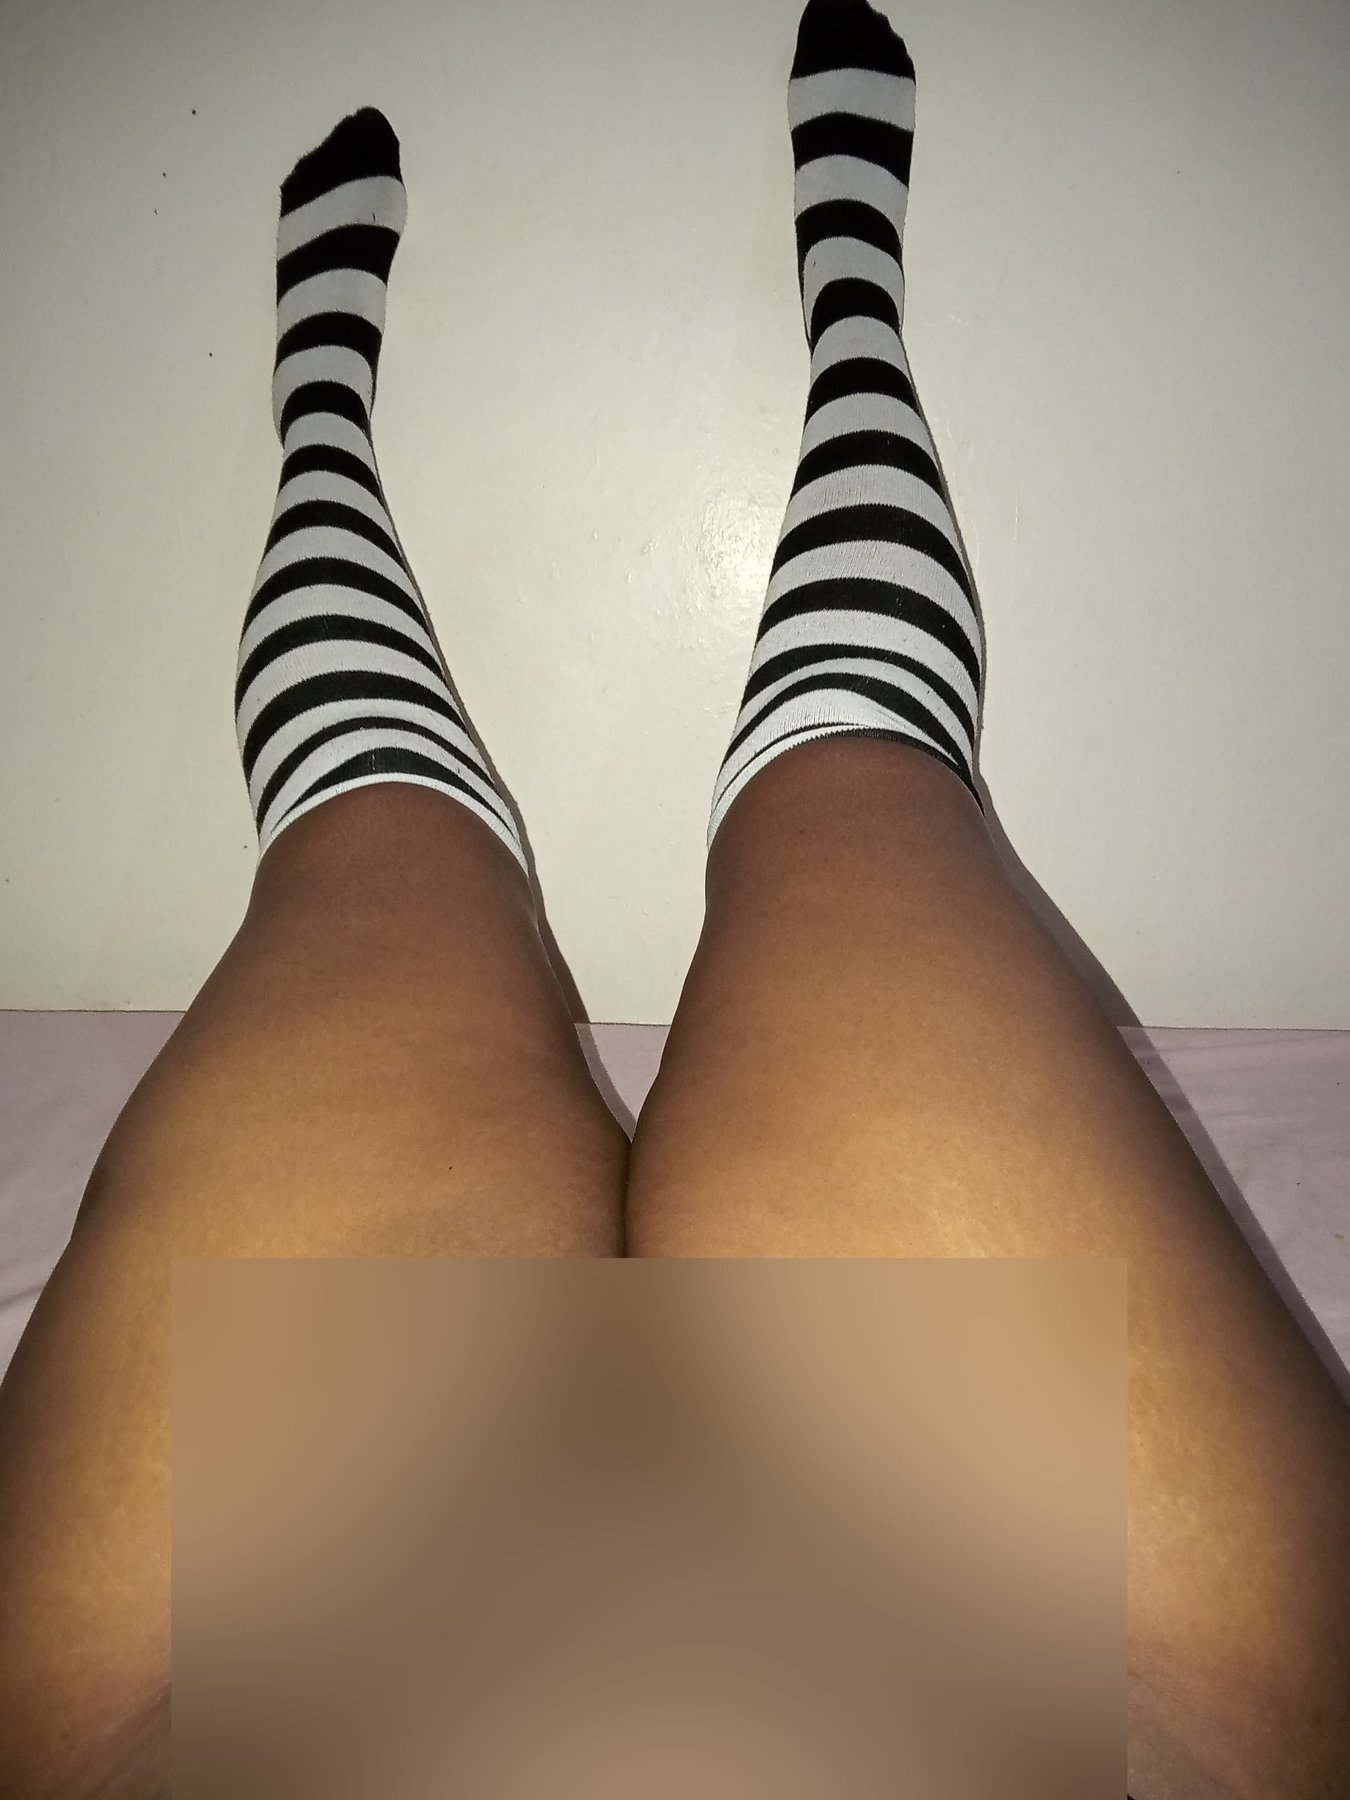 Lucy Busty BBW incalls/Videocall, Italian adult performer in Nairobi